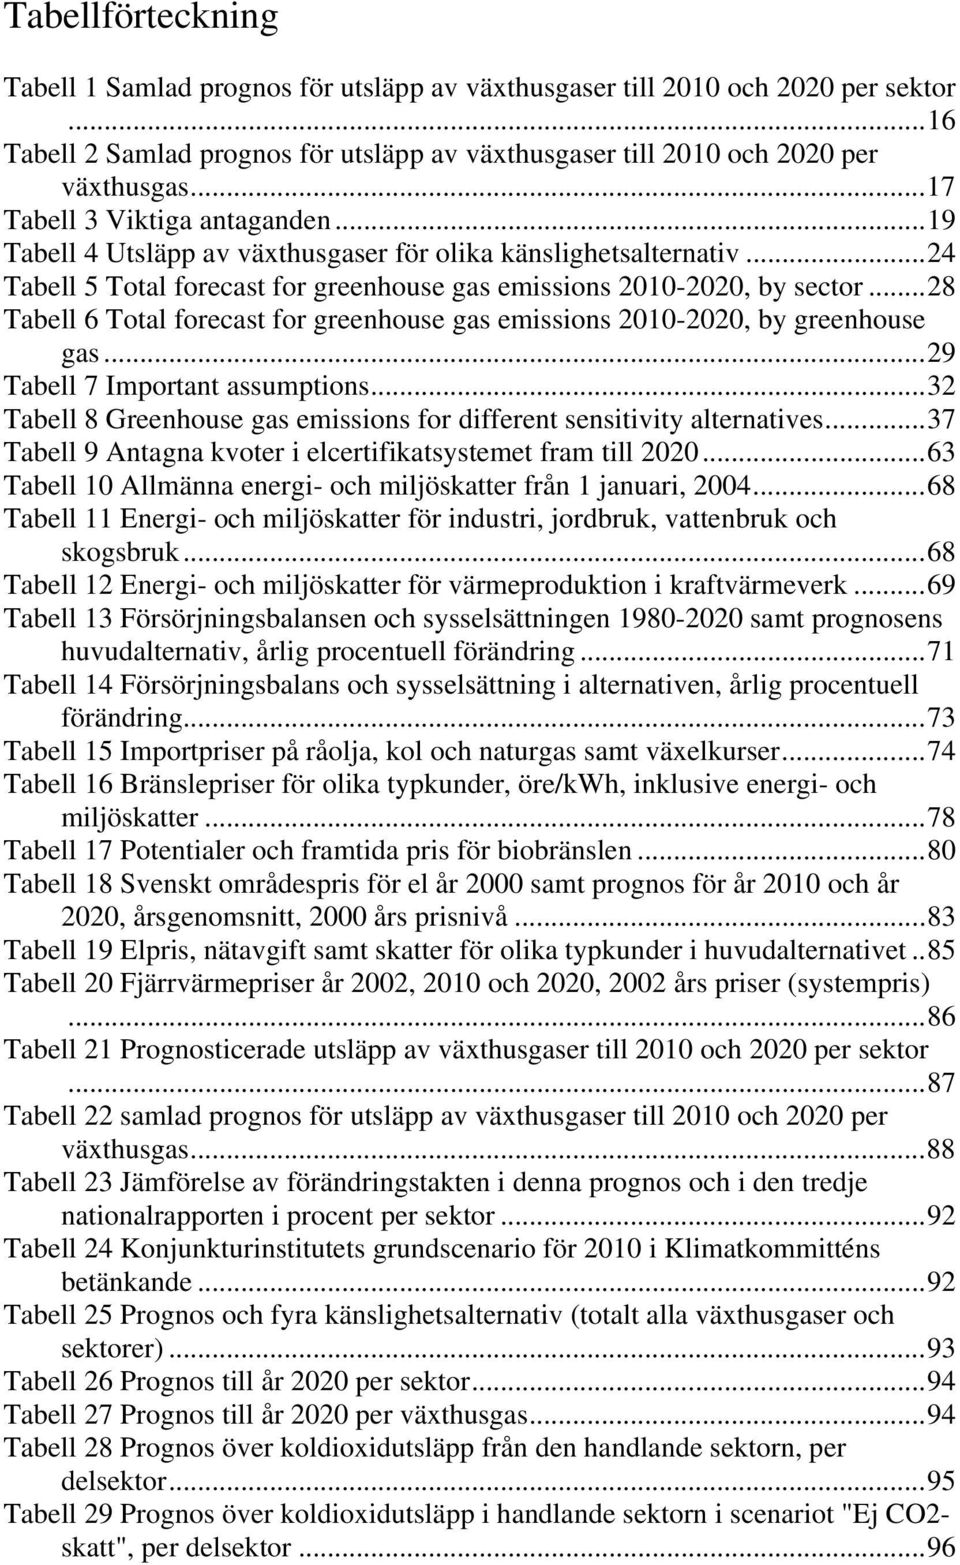 ..28 Tabell 6 Total forecast for greenhouse gas emissions 2010-2020, by greenhouse gas...29 Tabell 7 Important assumptions...32 Tabell 8 Greenhouse gas emissions for different sensitivity alternatives.